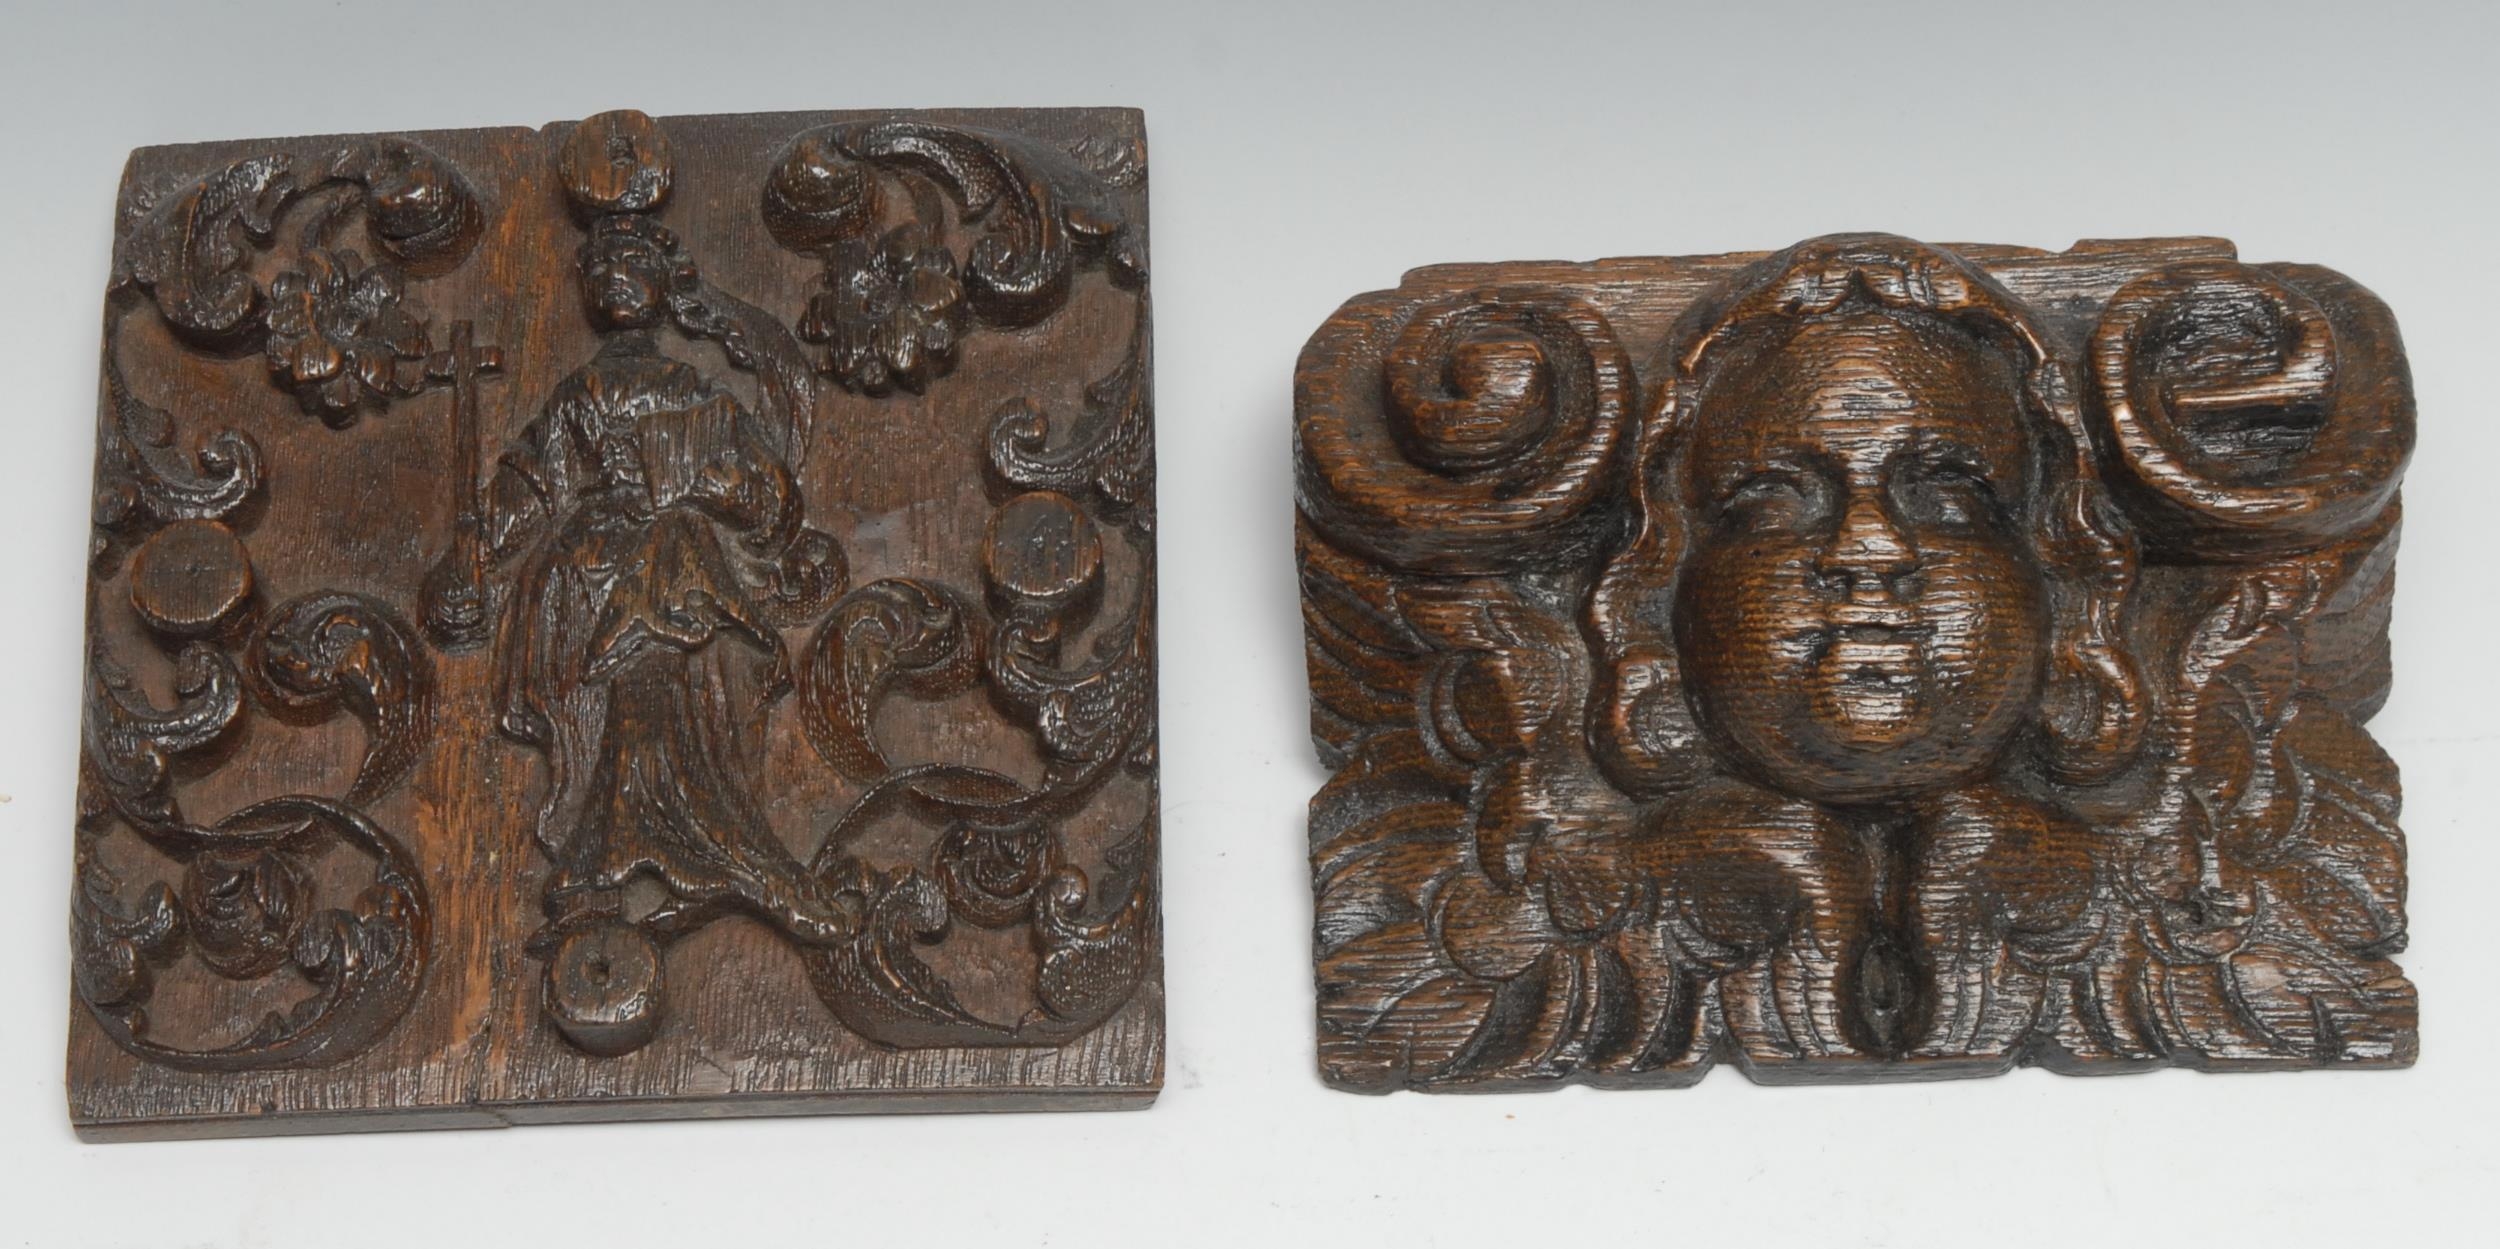 A 17th century oak panel, carved in relief with St Helena and attributes, flanked by flowering